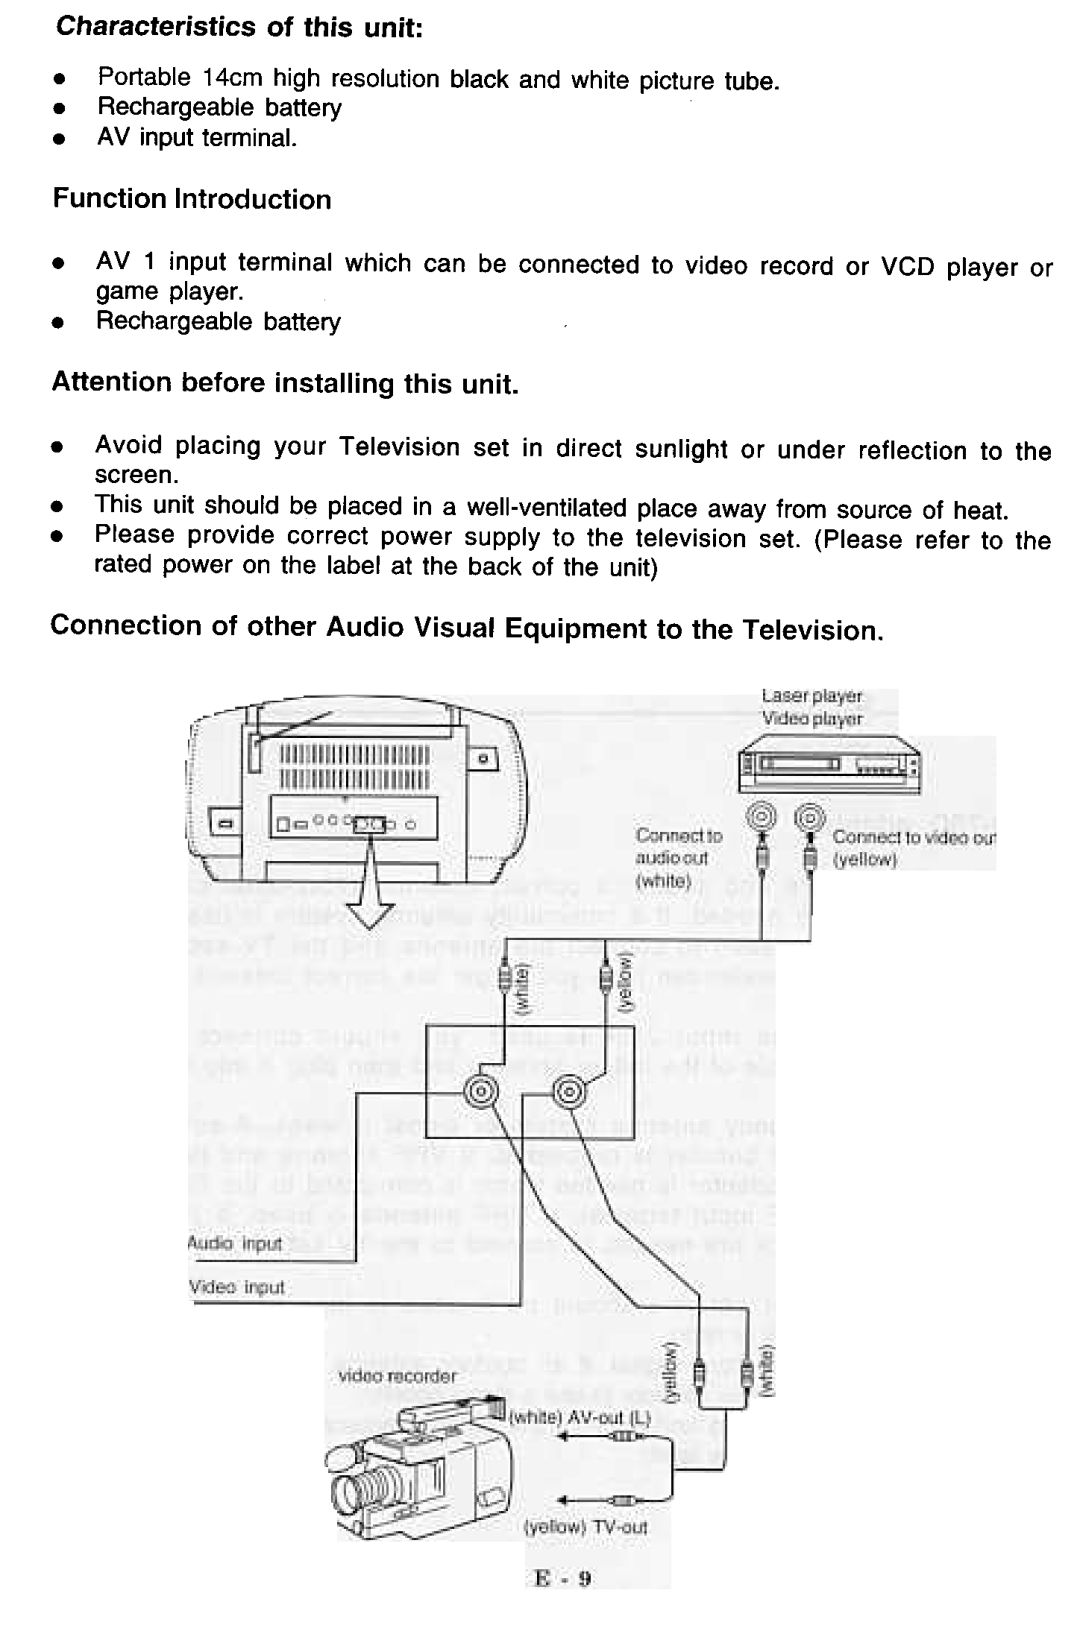 Memorex MPT -3460 manual Function Introduction, Attention before installing this unit, screen 